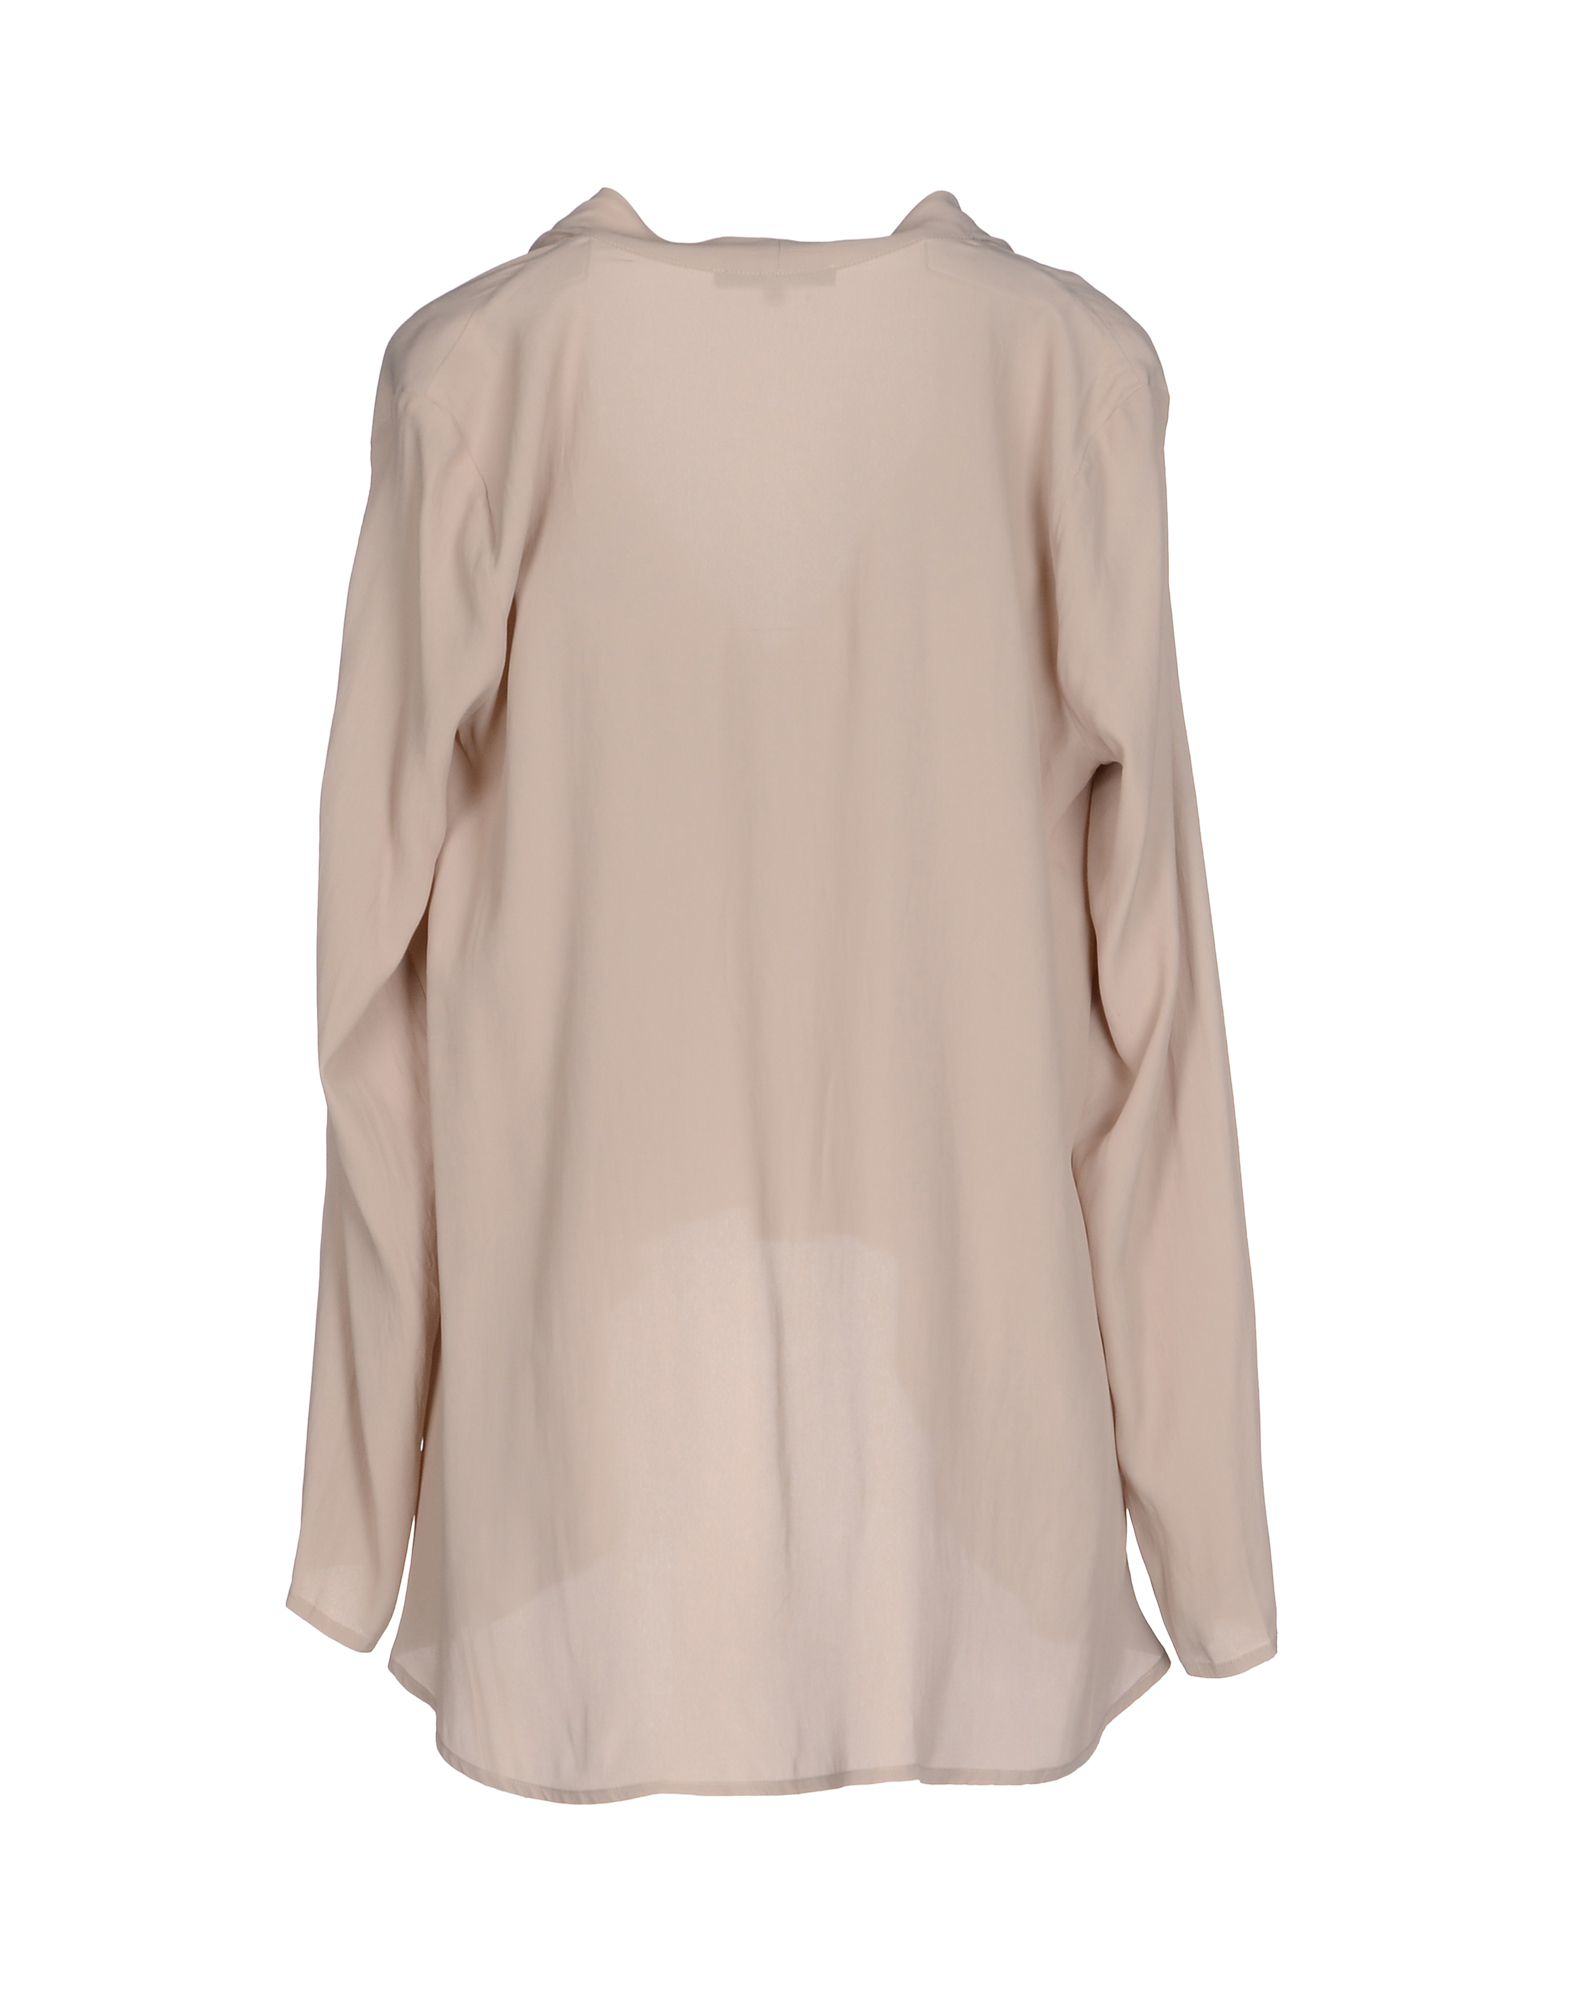 Patrizia pepe Blouse in Brown (Light brown) | Lyst